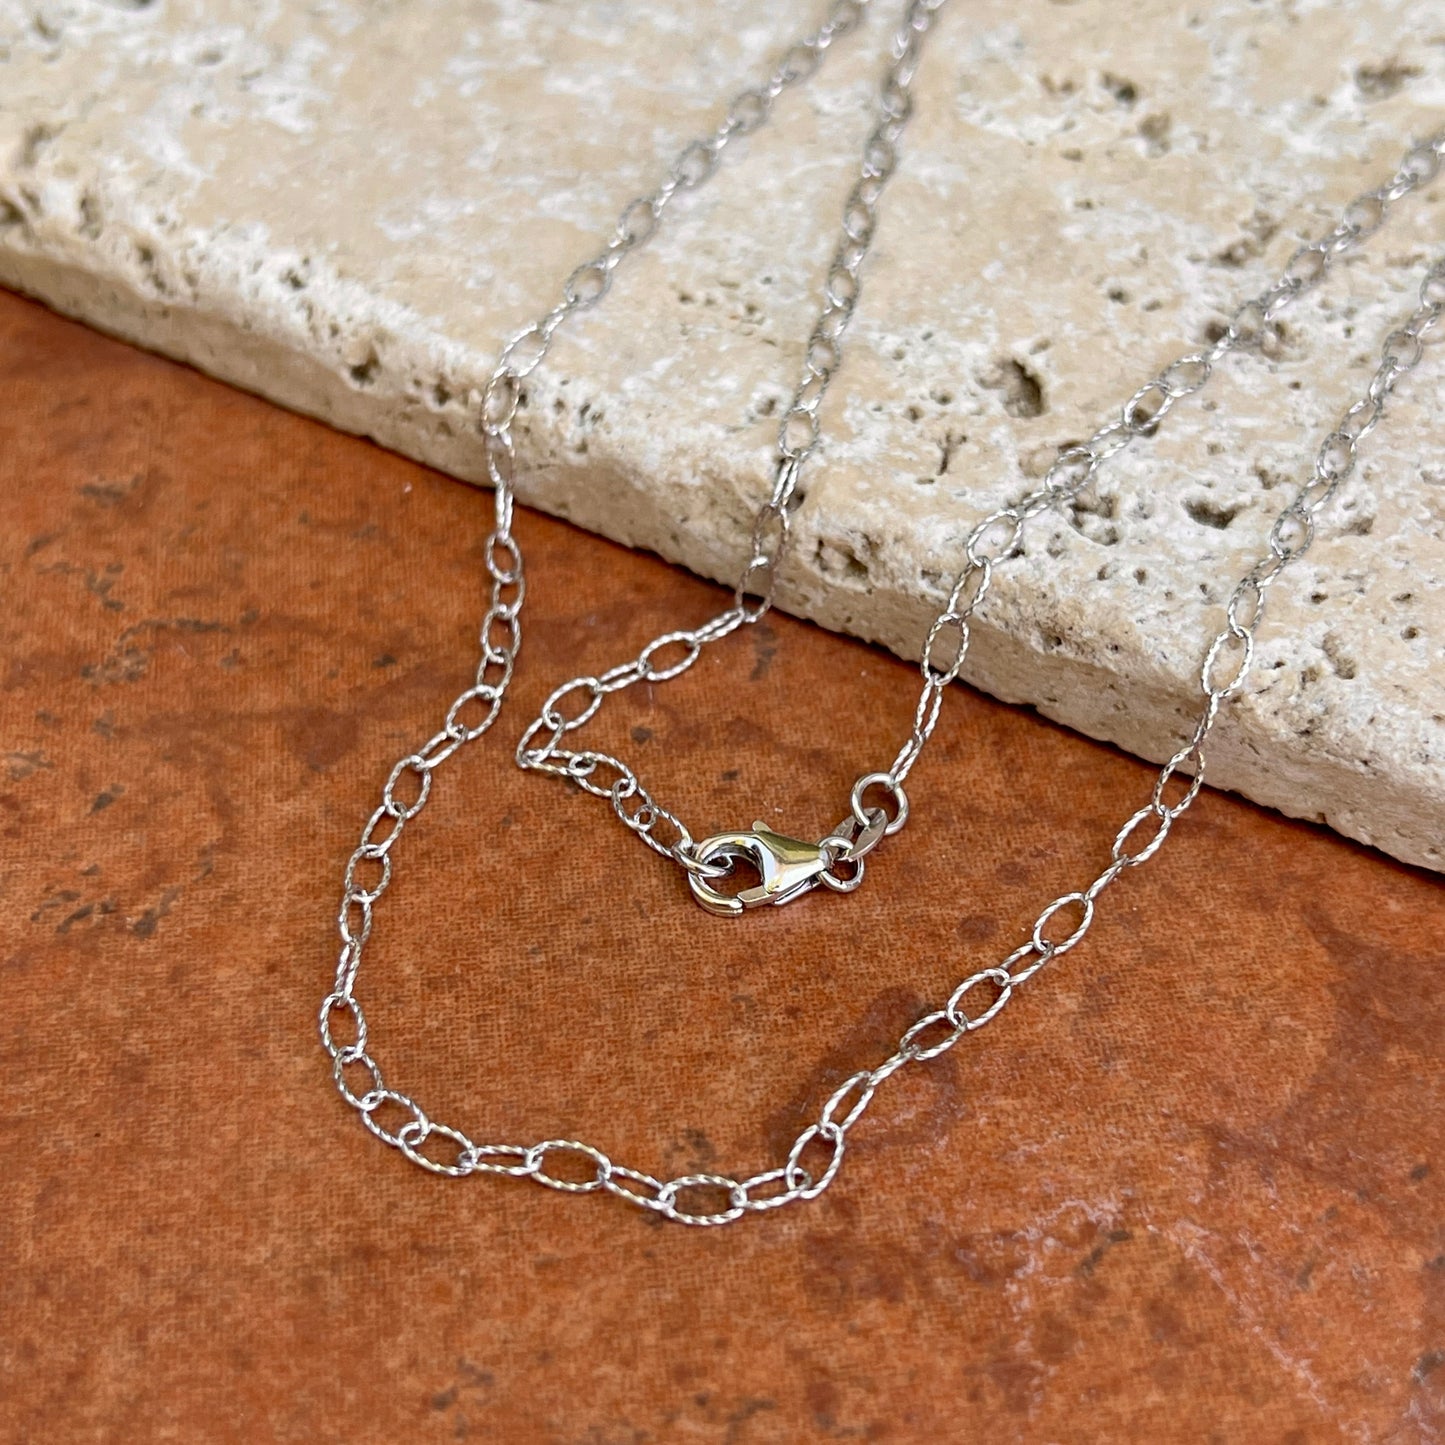 14KT White Gold Textured 2.5mm Oval Link Chain Necklace